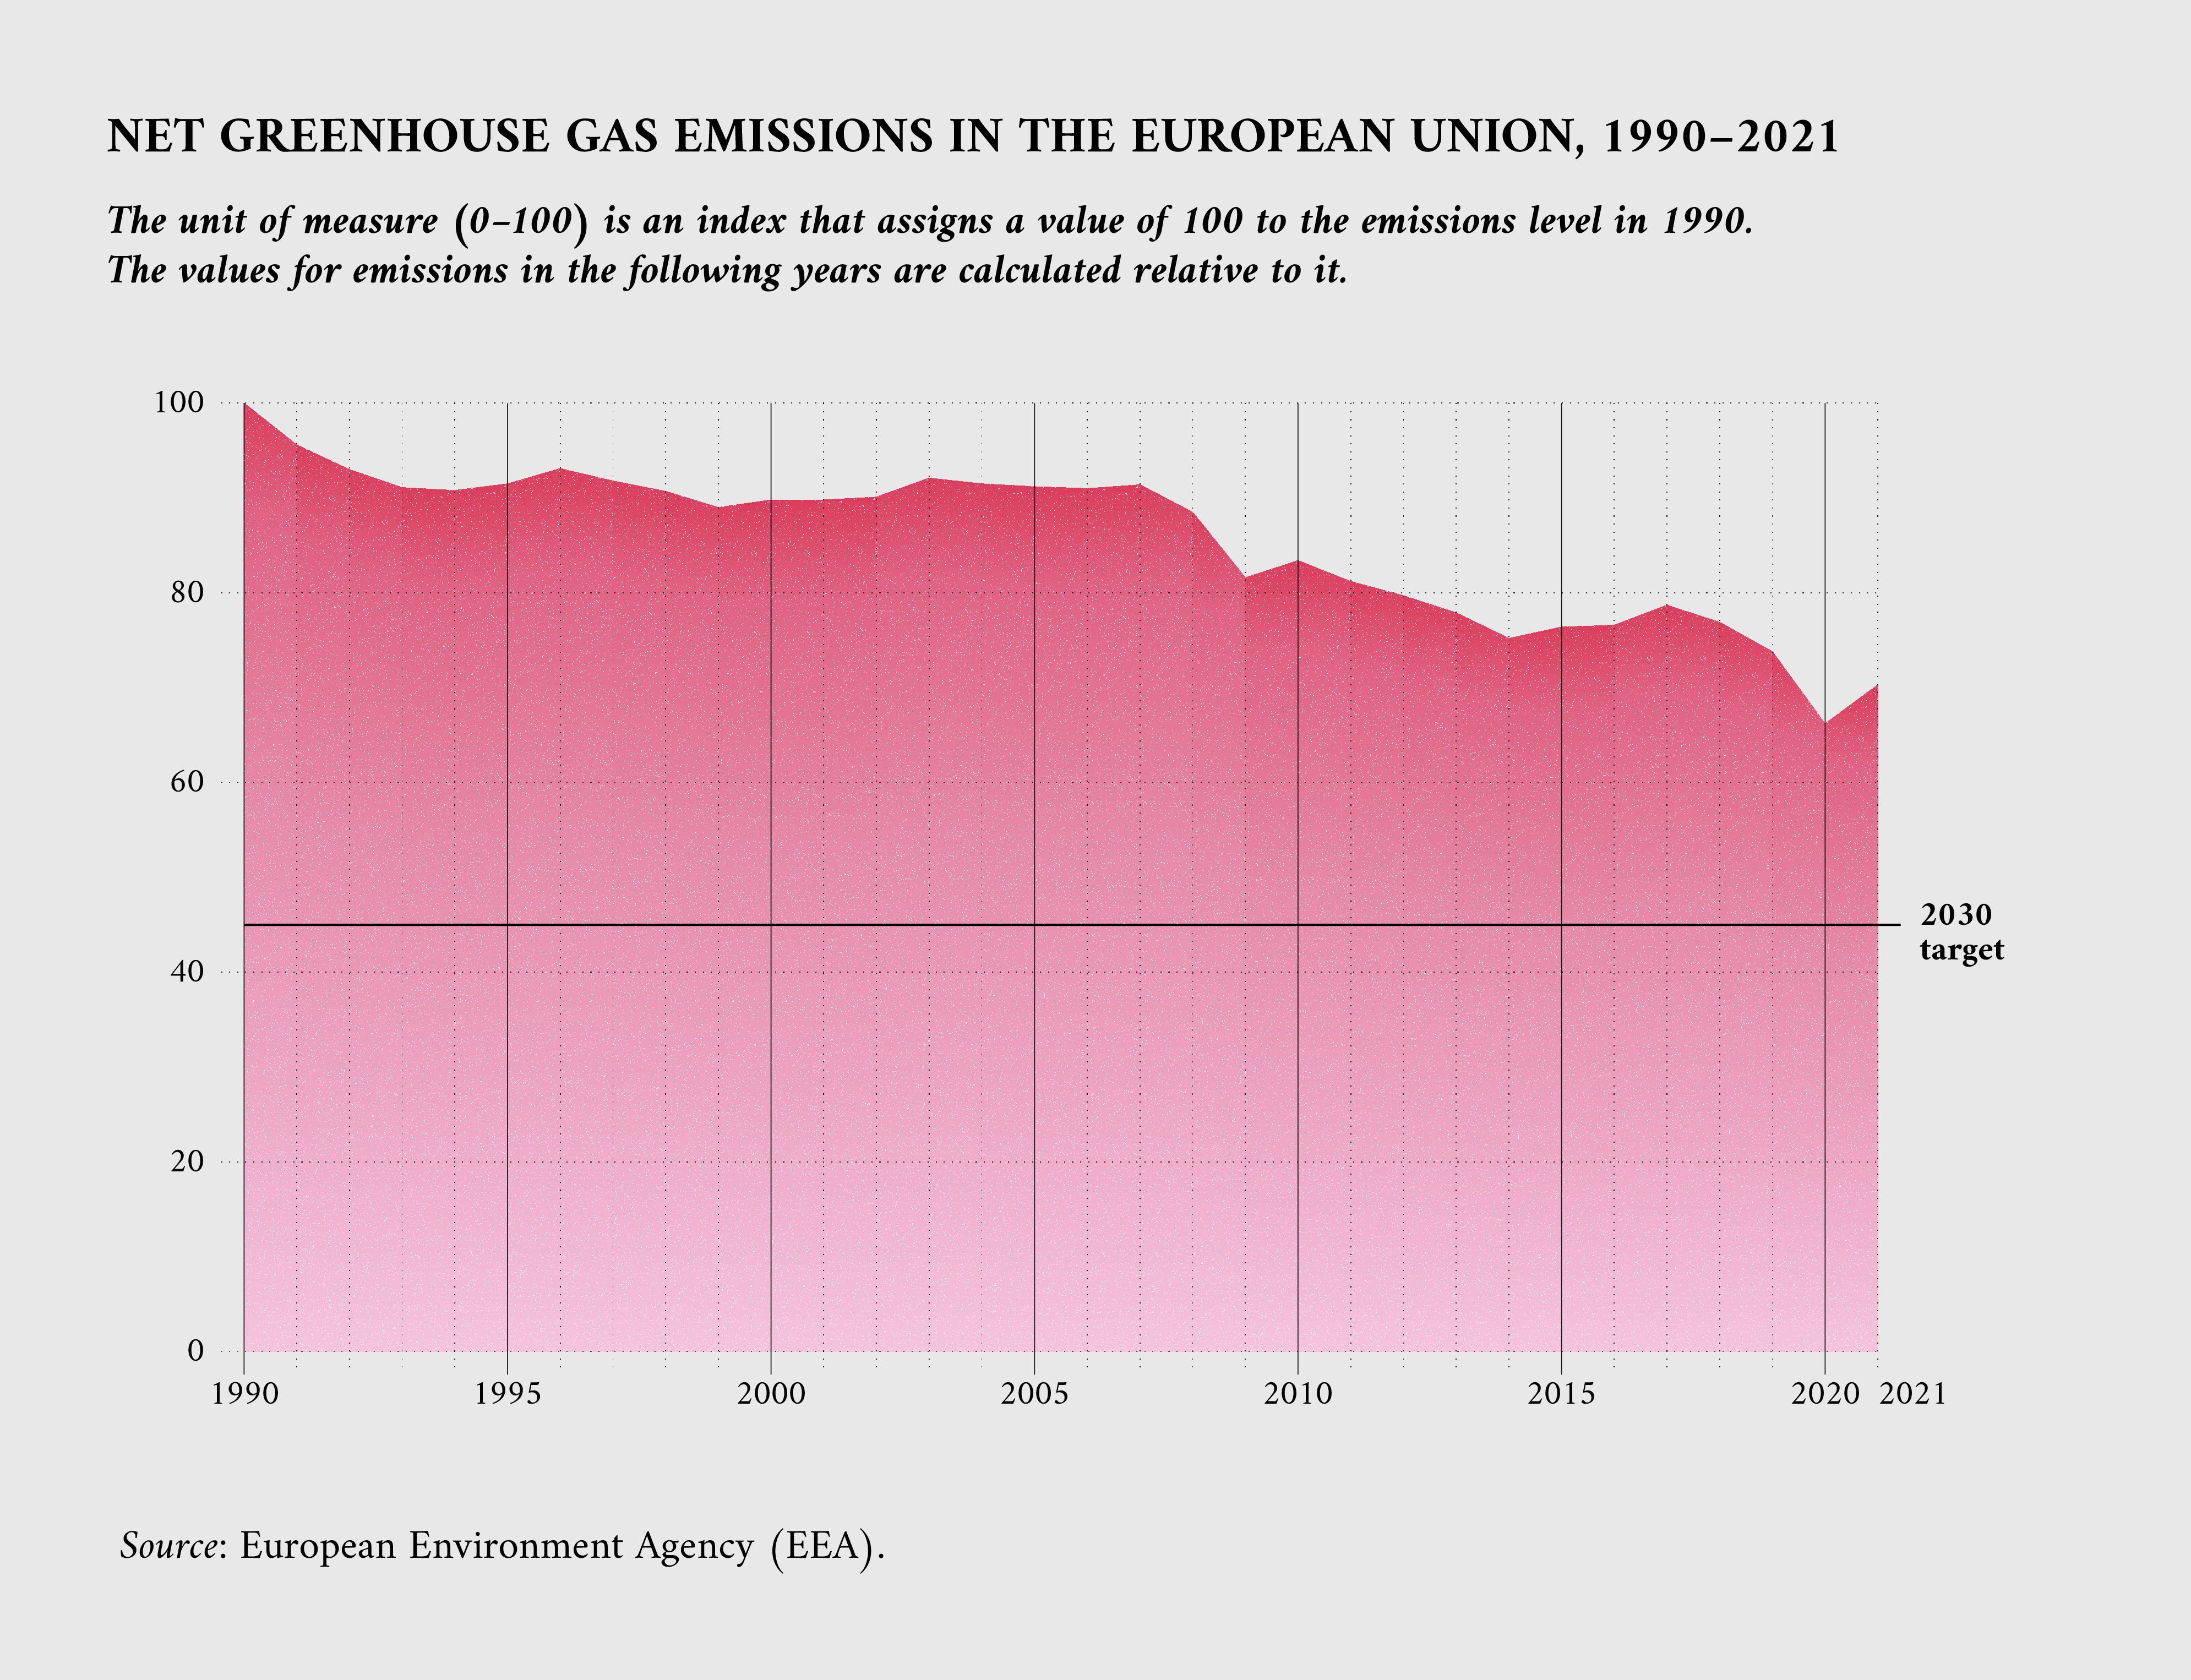 Net greenhouse gas emissions in the EU, 1990-2021